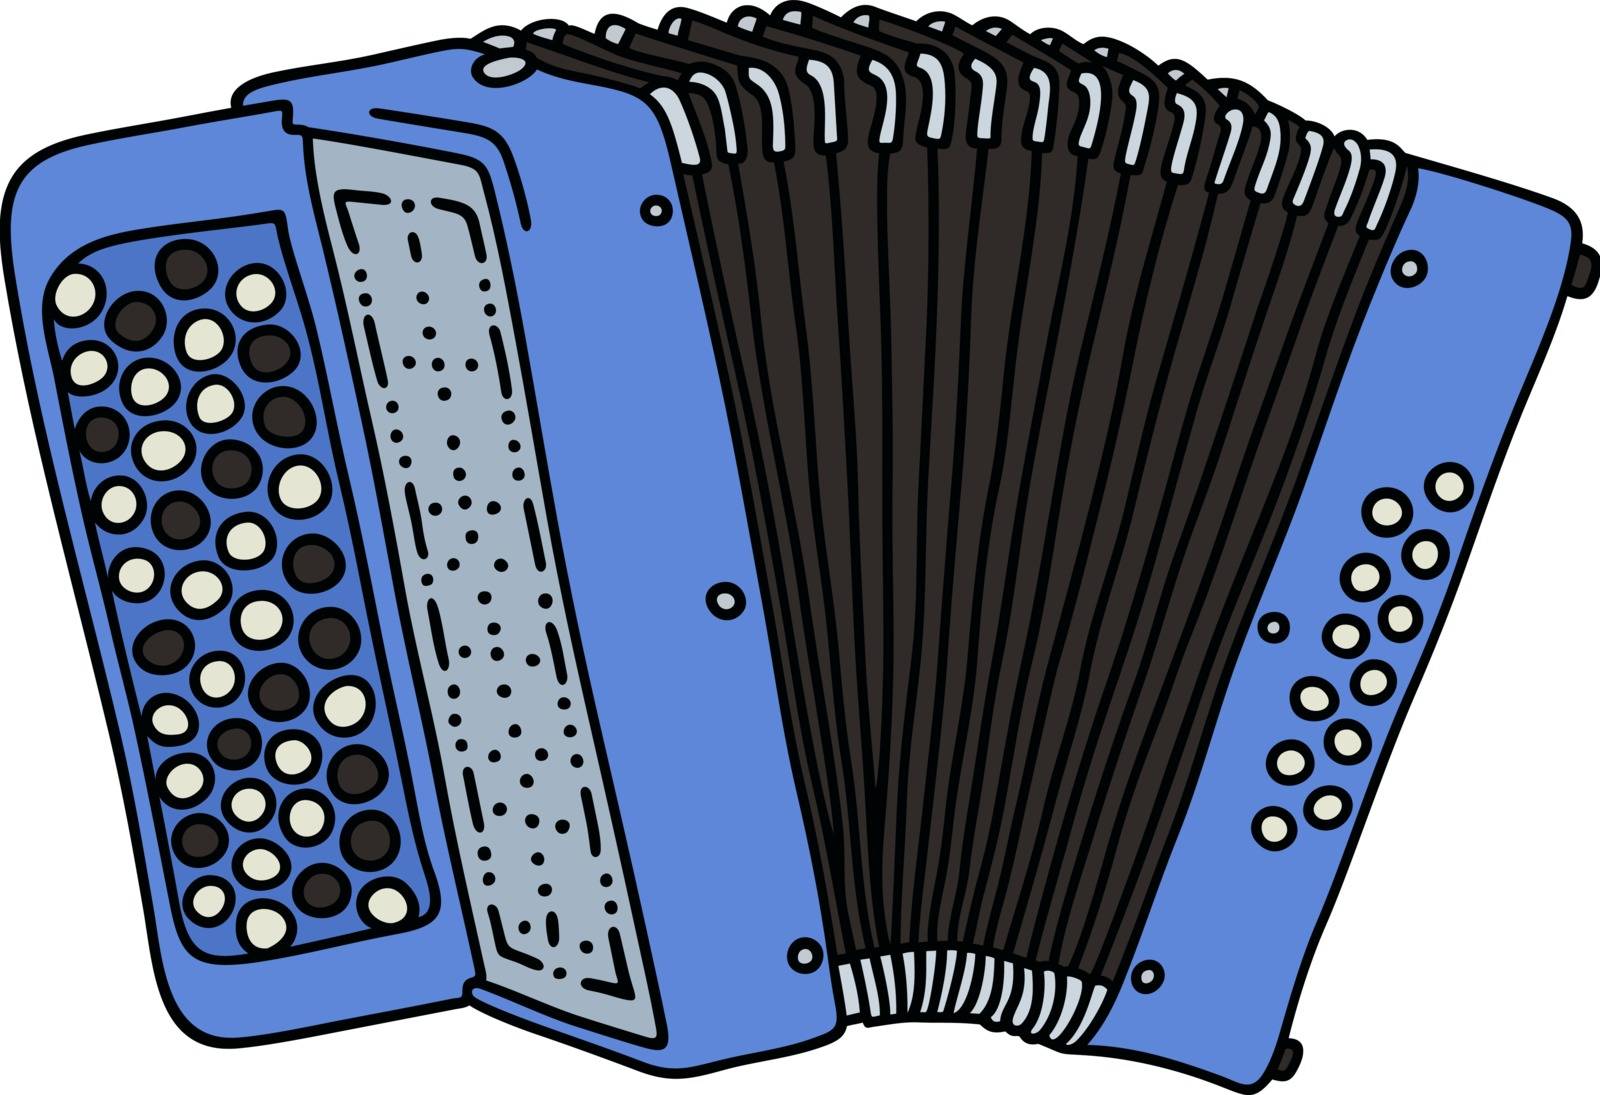 Classic blue accordion by vostal